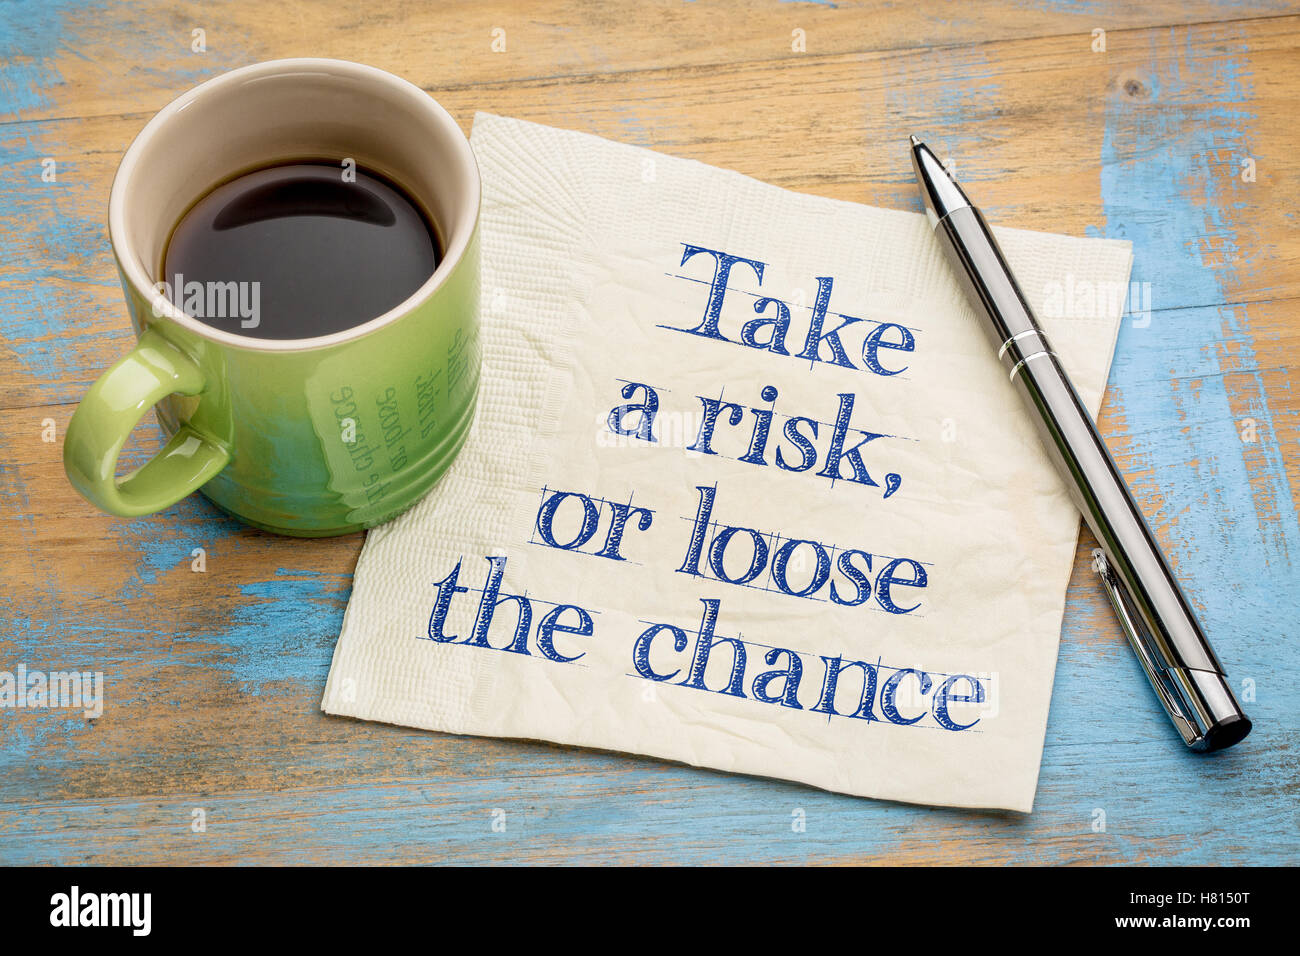 Take a risk or loose the chance - handwriting on a napkin with a cup of espresso coffee Stock Photo